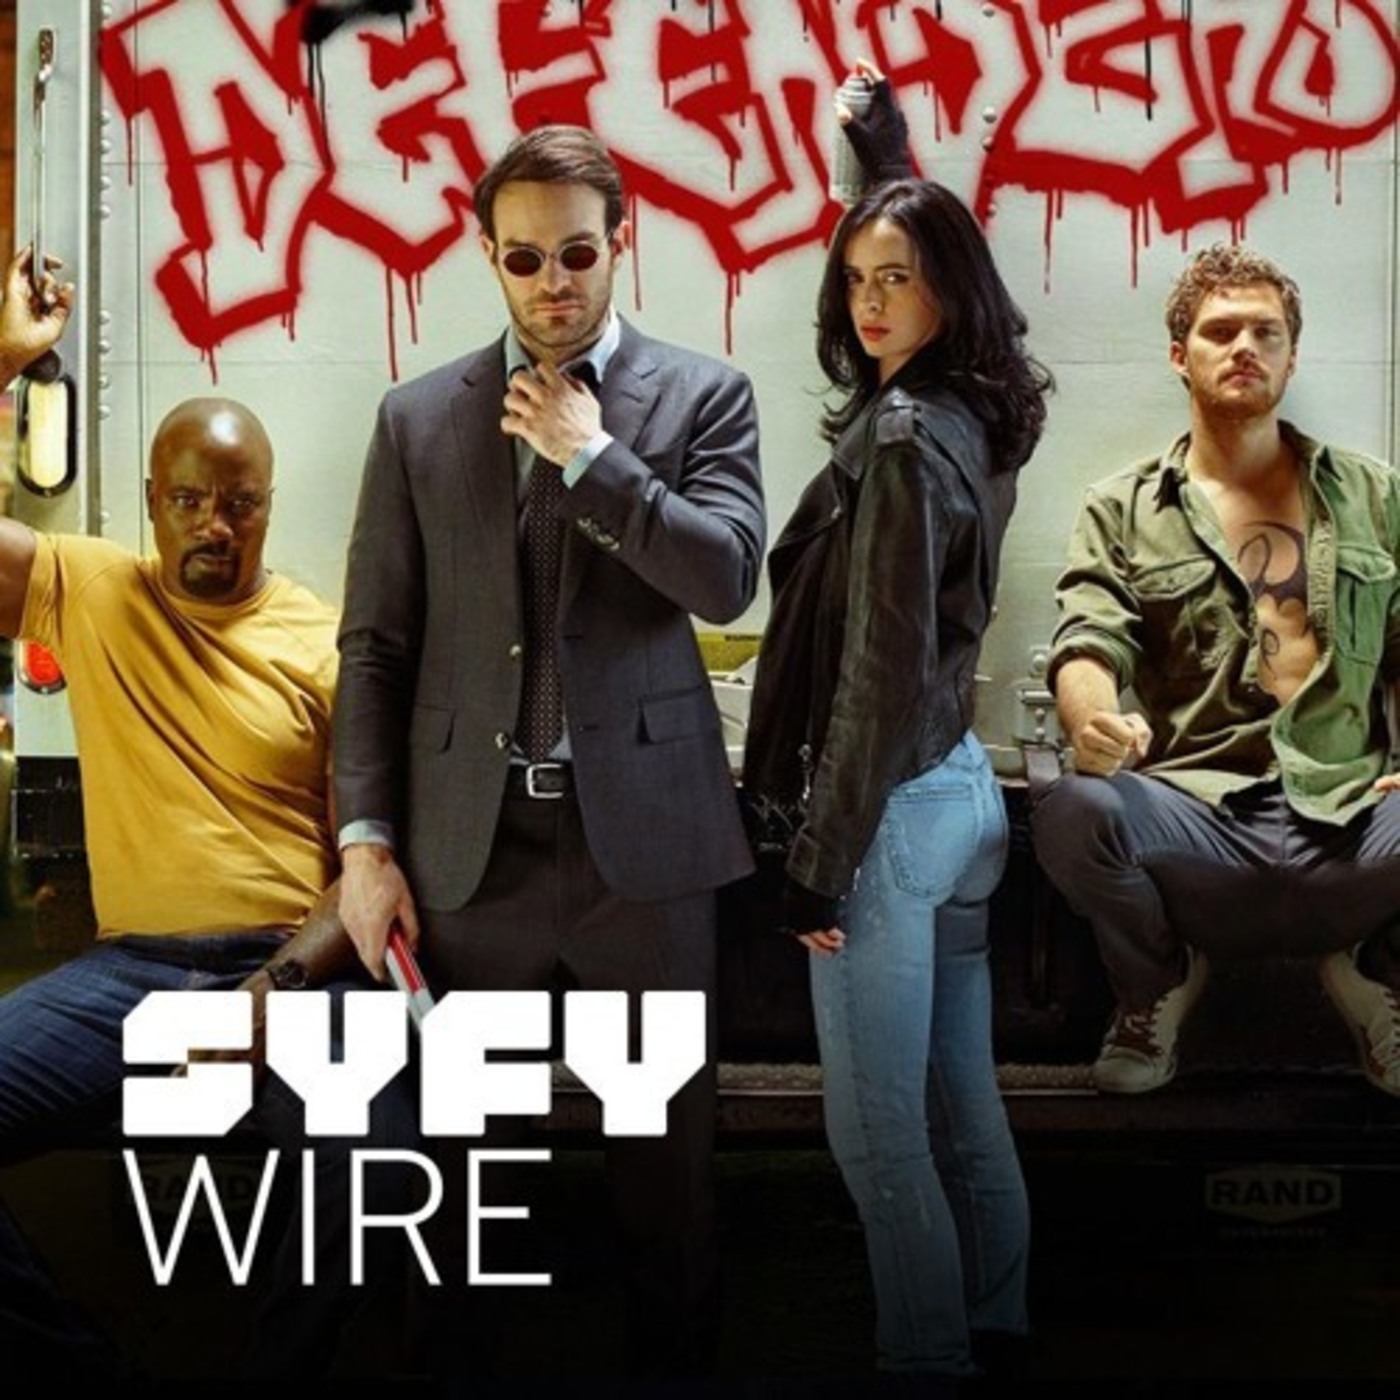 Who Won the Week Episode 89: Marvel's The Defenders, the Obi-Wan movie, and more! by Syfy Wire